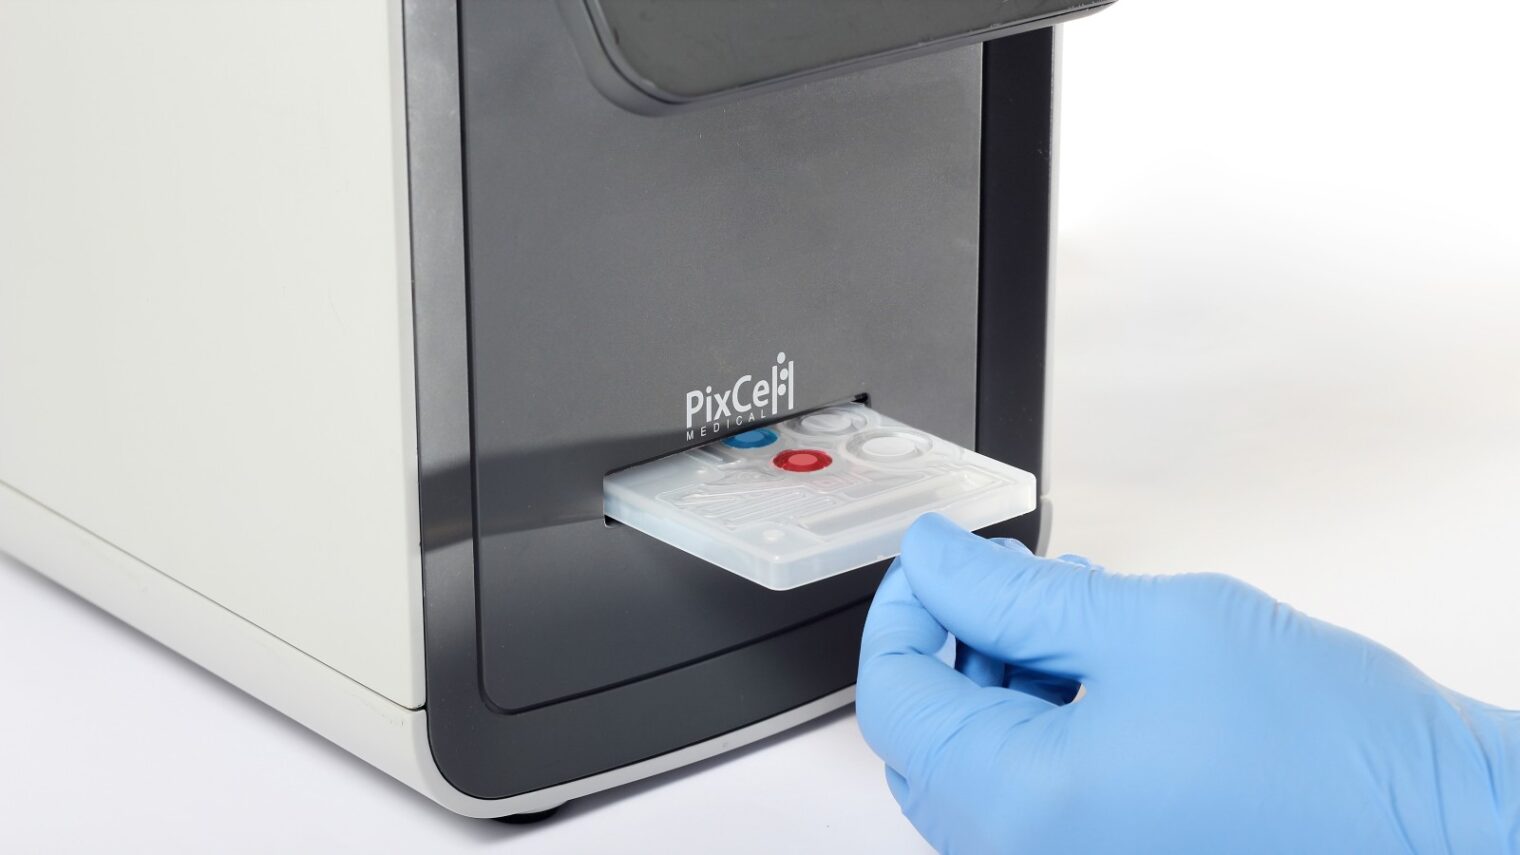 Inserting the disposable blood sample cartridge into the HemoScreen. Photo courtesy of PixCell